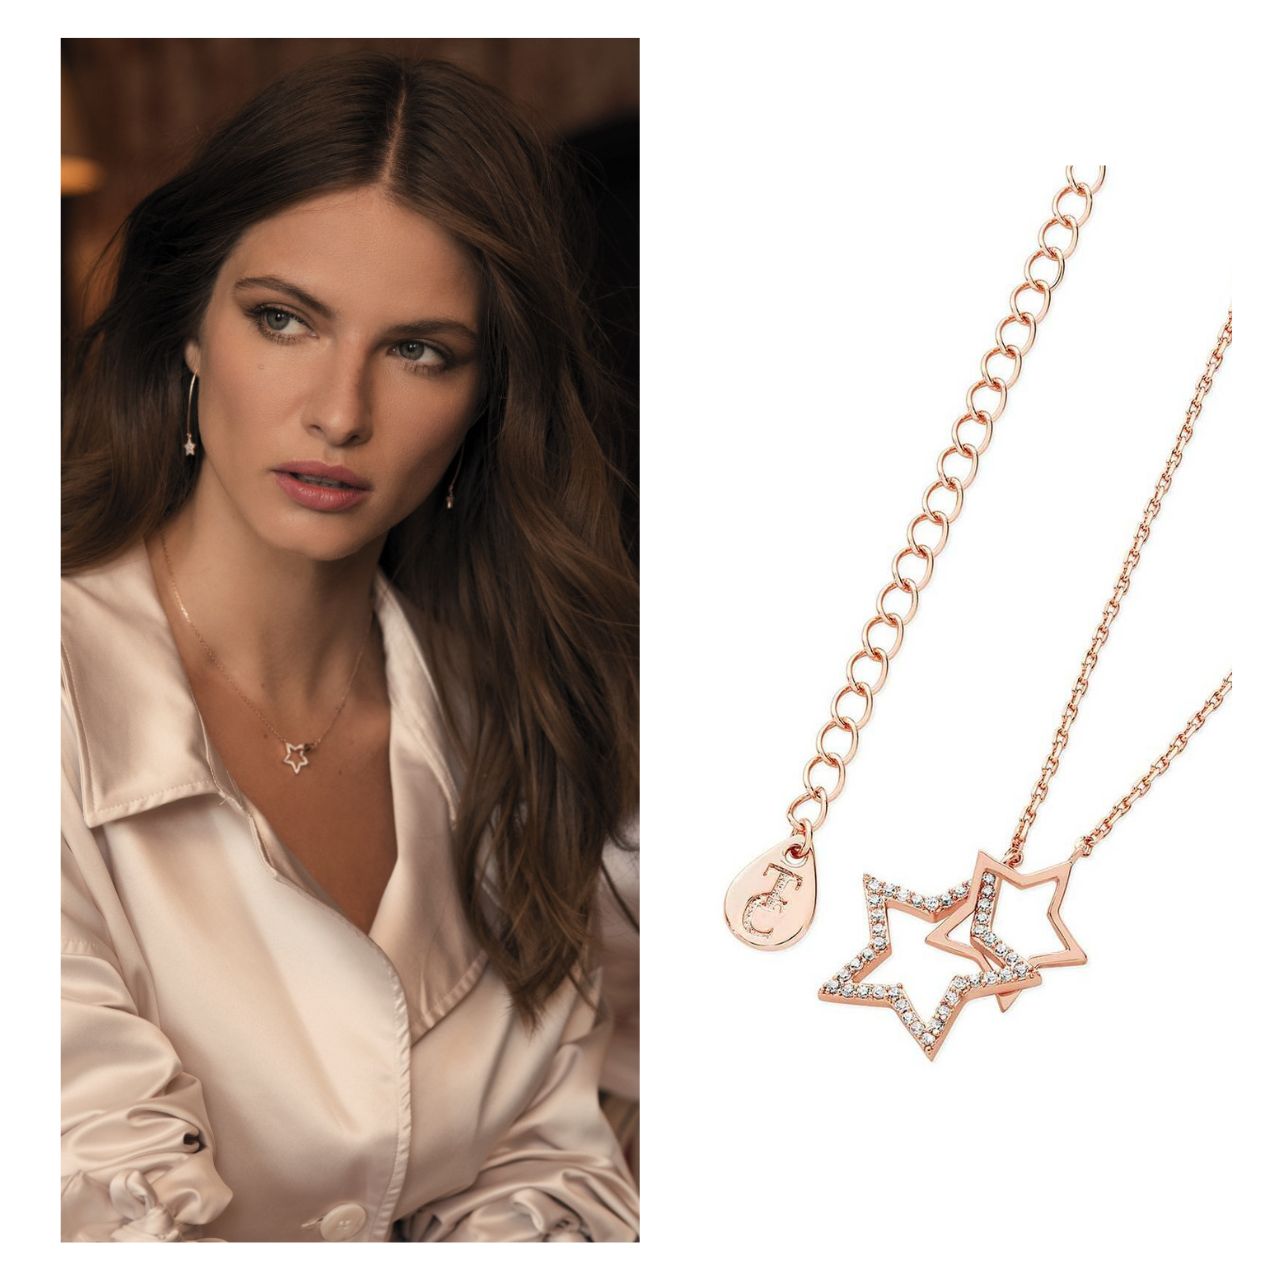 Tipperary Crystal Star Interlocking Pendant Rose Gold  Guaranteed to be a staple piece for years these on-trend interlocking stars comes in rose gold A larger crystal encrusted star is interlocke with a lustrous polished gold star. This pendant suspends from a cable chain which secures safely with a lobster claw clasp.